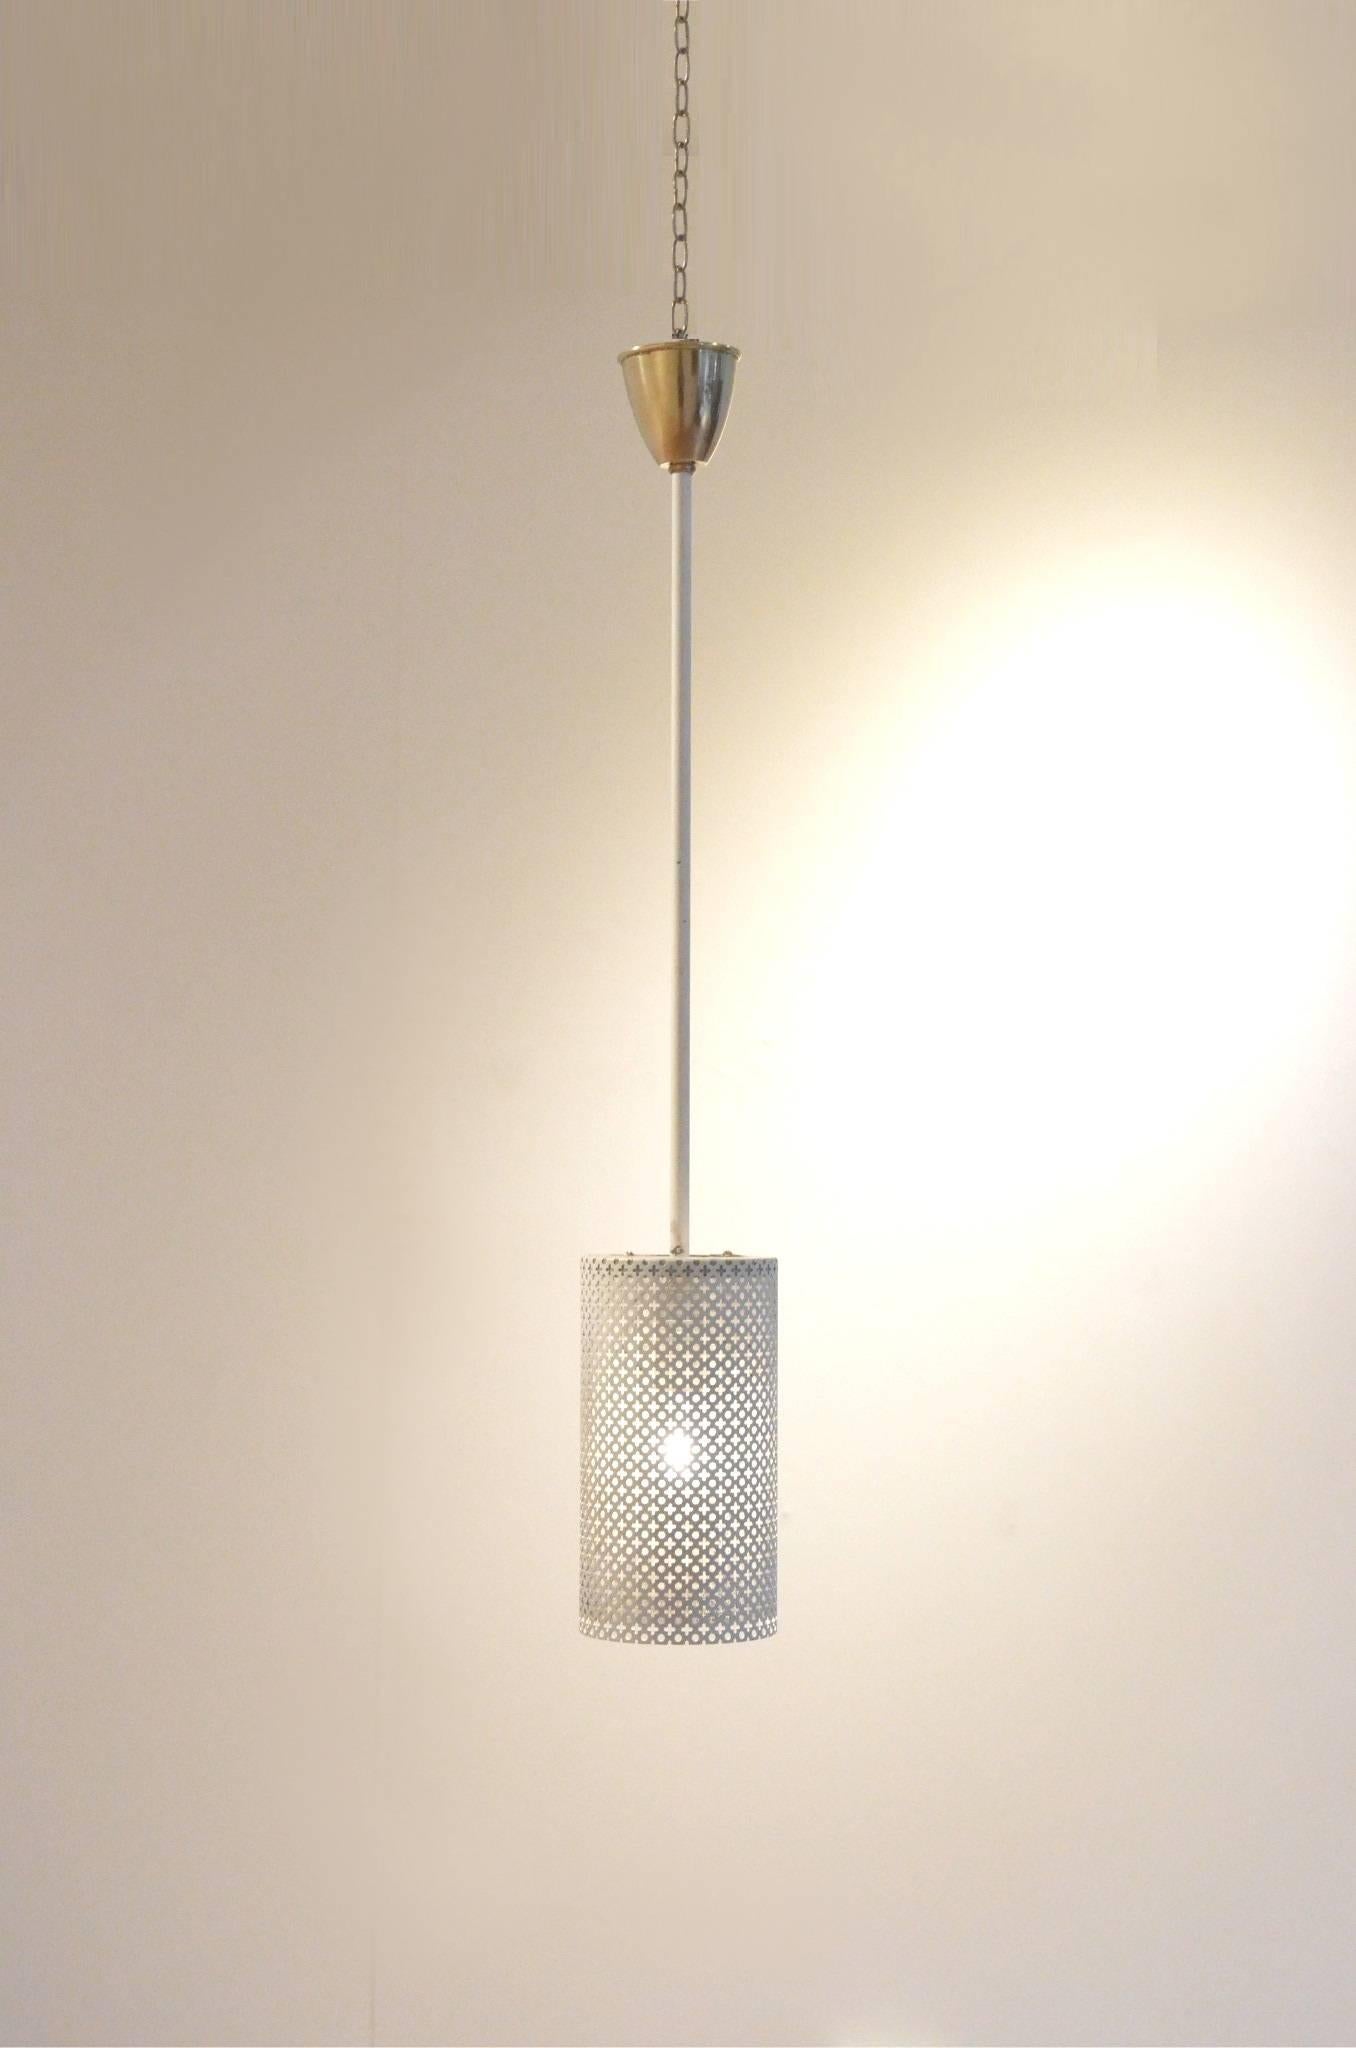 Minimalist pendant lamp from Pierre Guariche for Atelier Disderot, white perforated metal shade matched with brass accent.